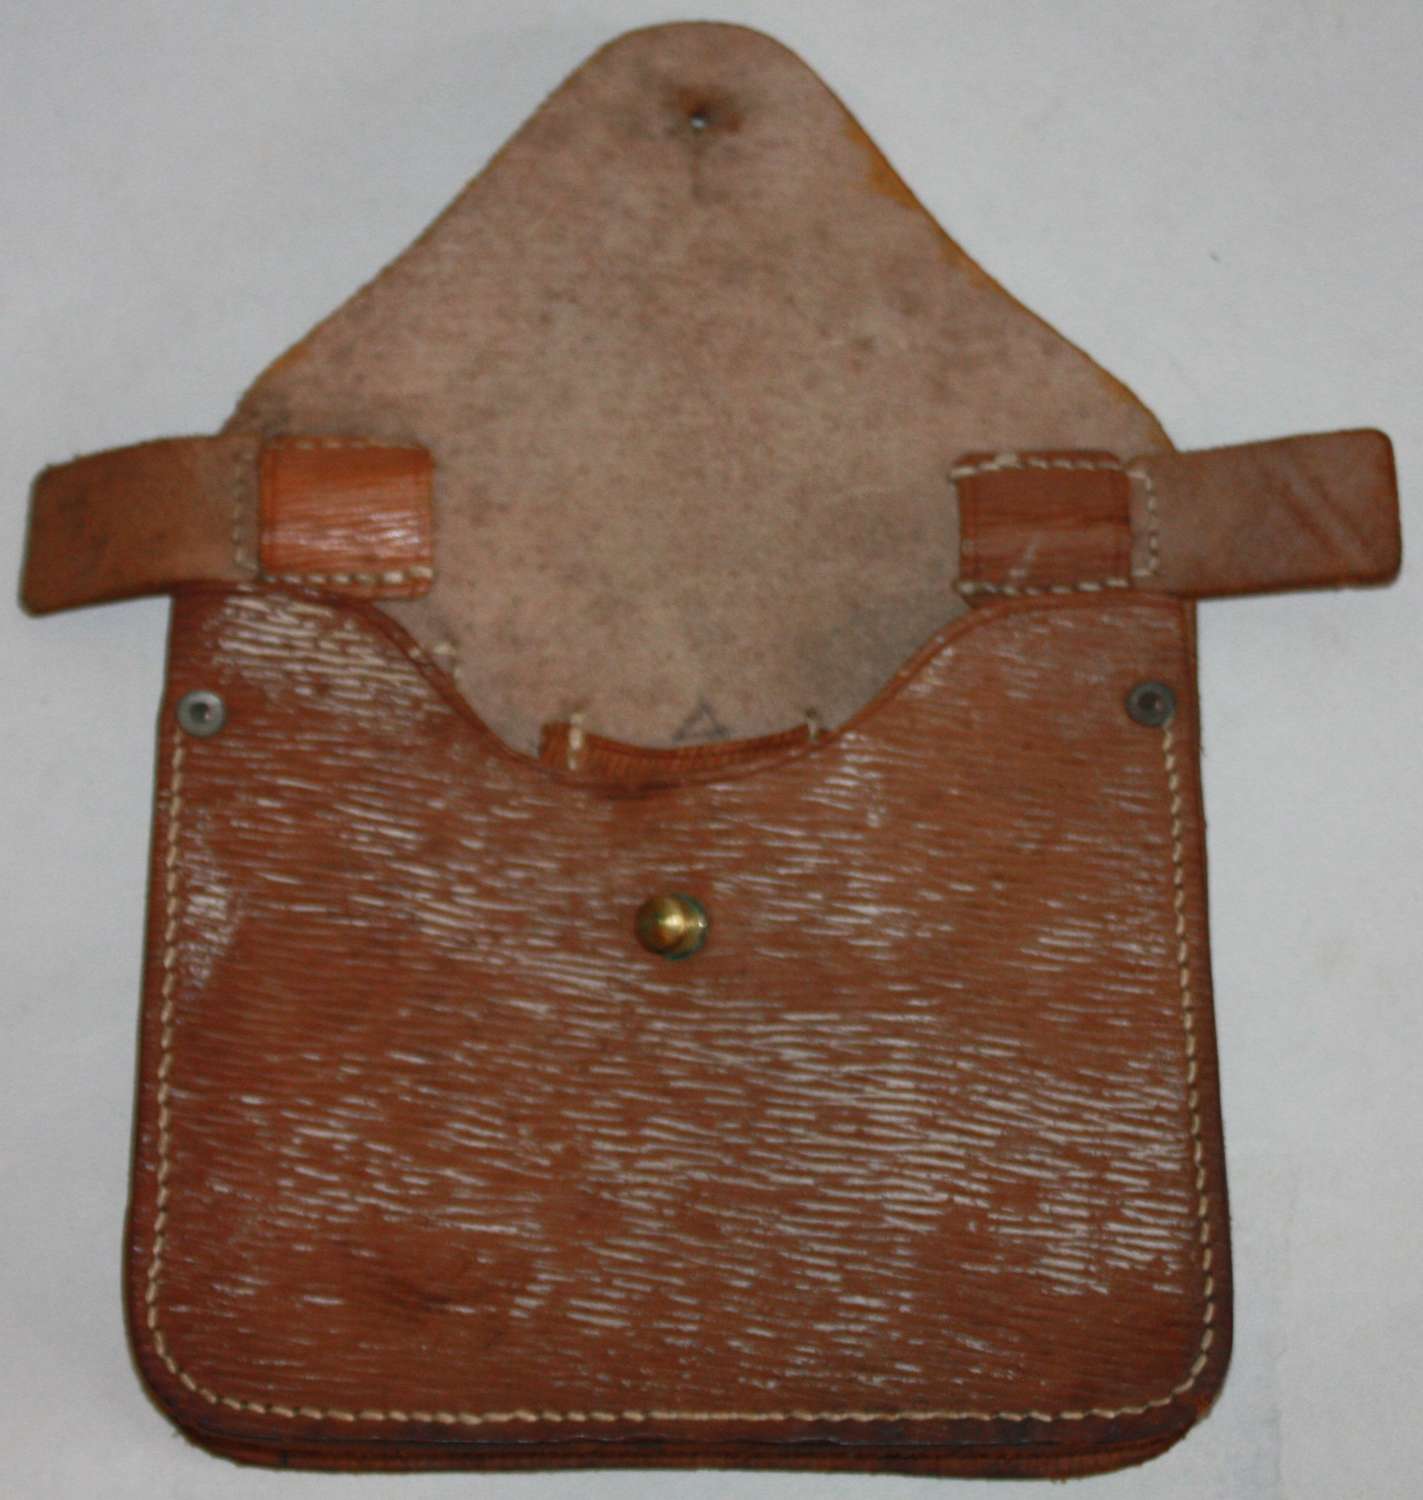 A 1942 DATED LEATHER FOLDING SAW POUCH